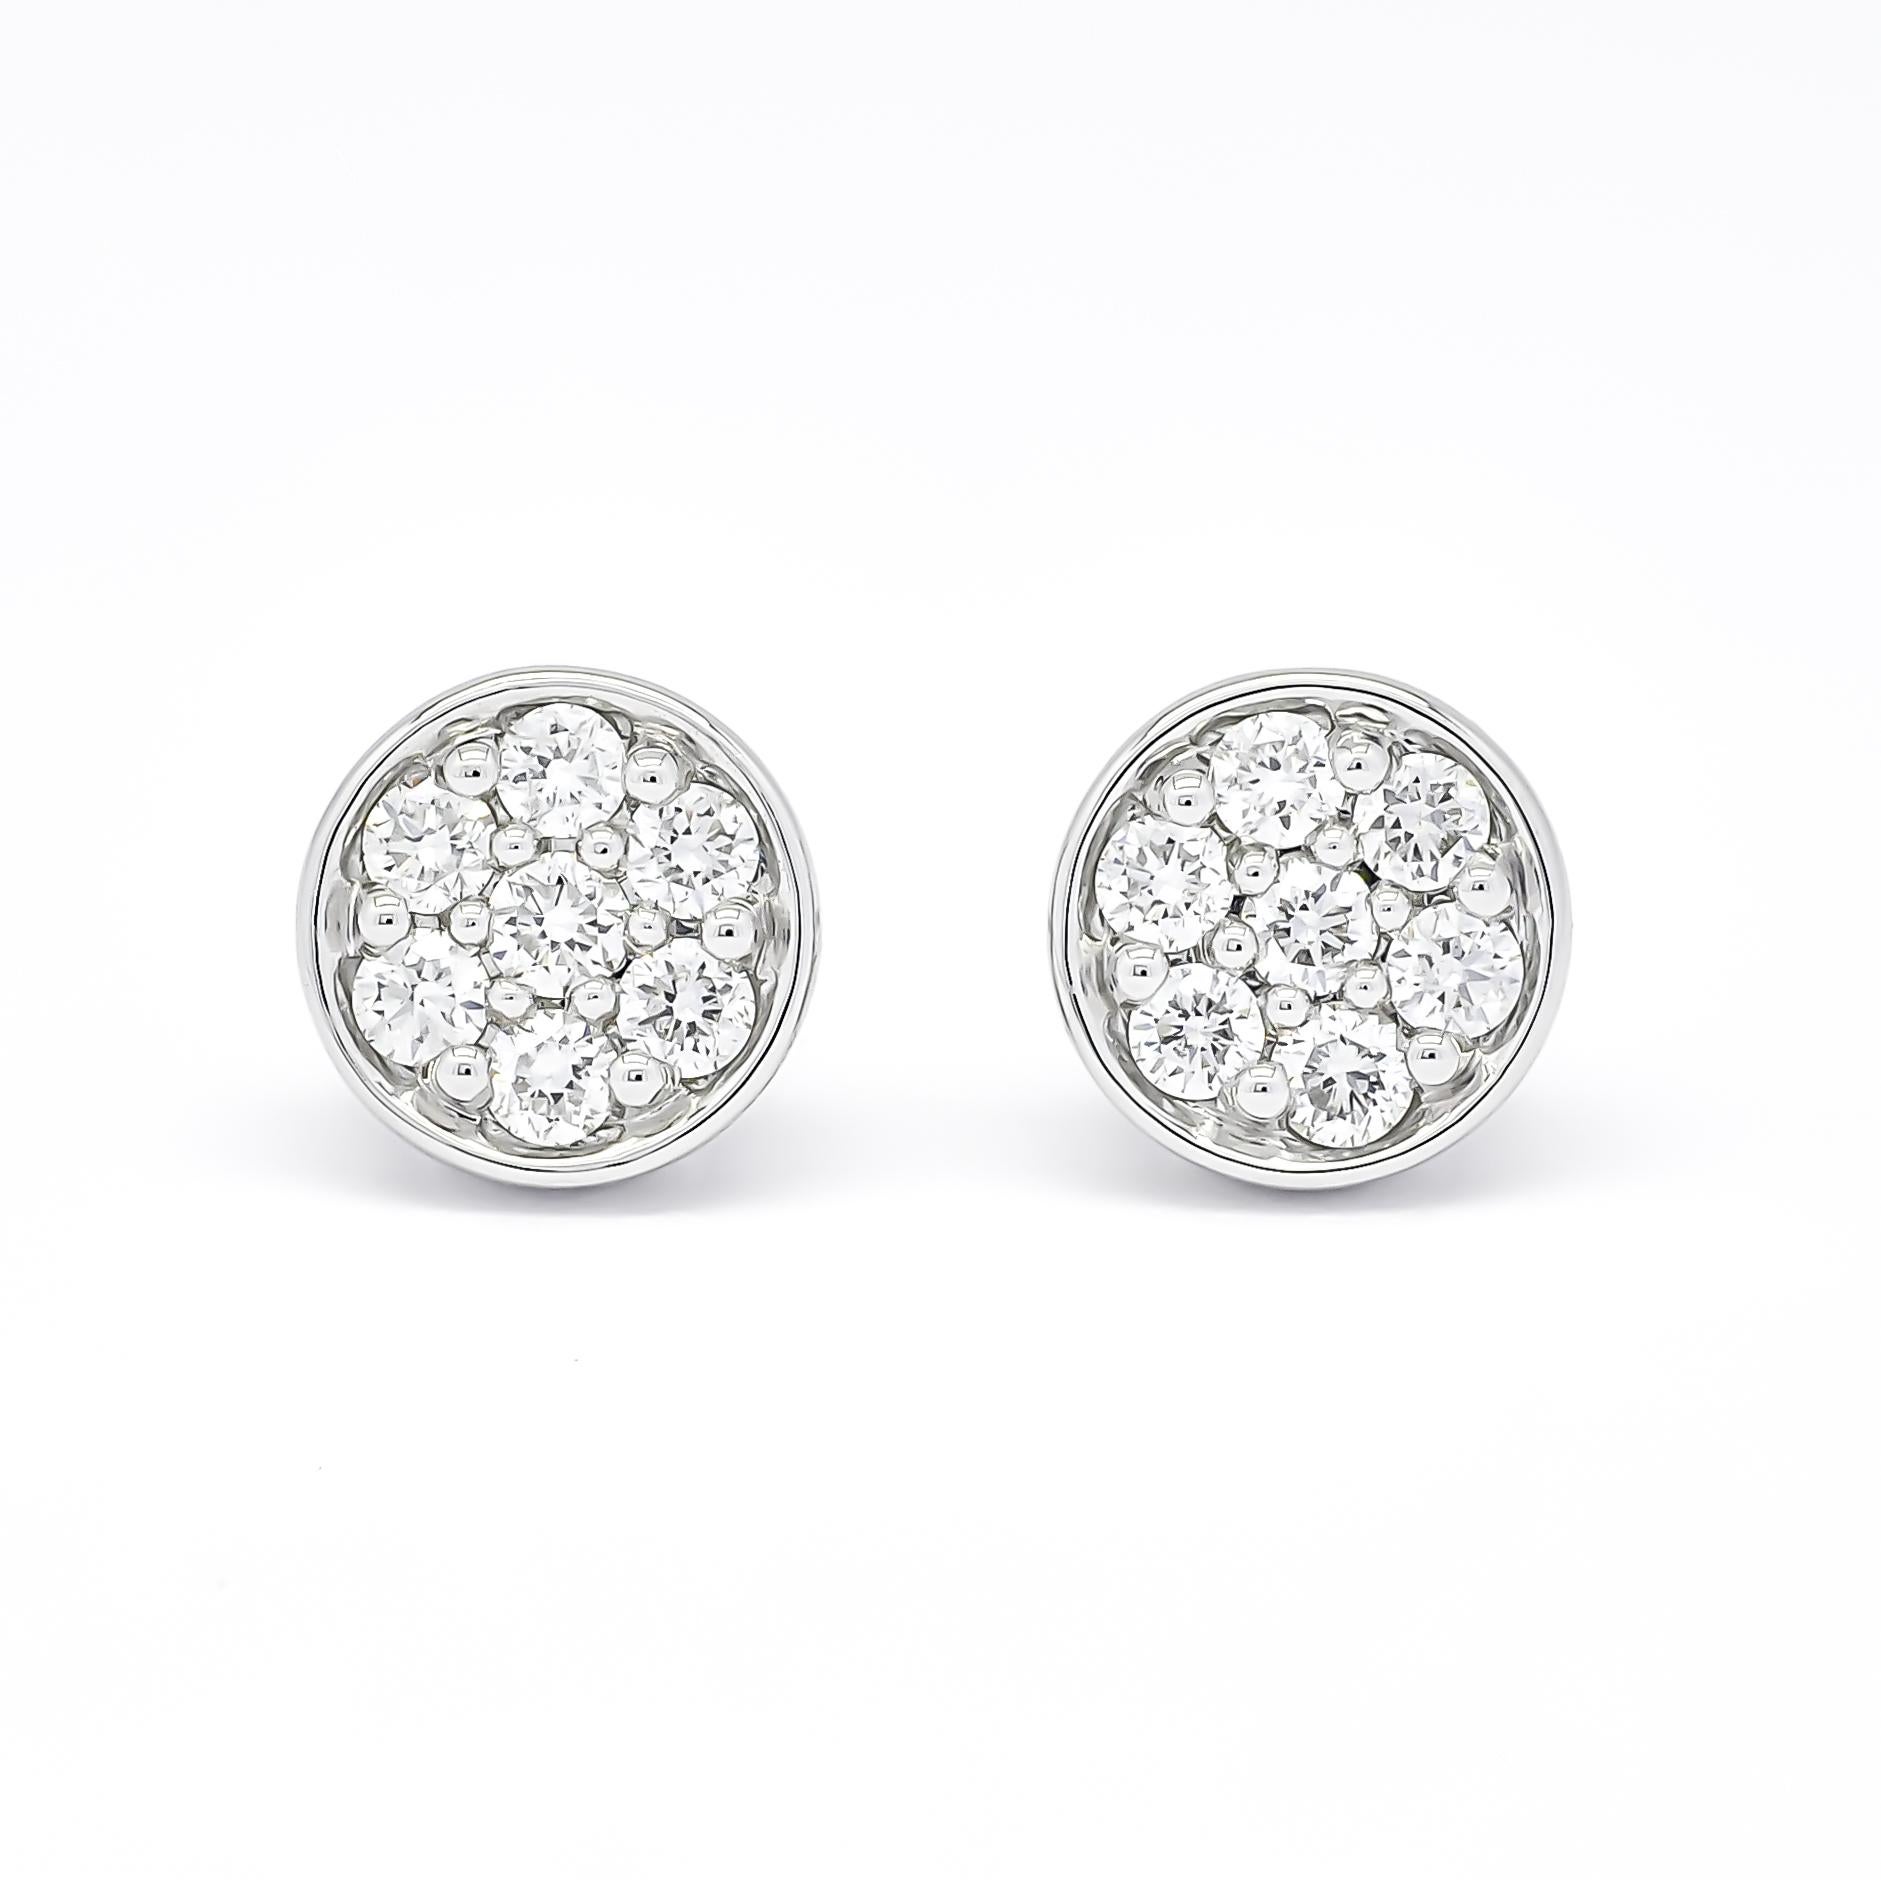 Crafted with utmost care, each earring features a delicate cluster of natural diamonds, carefully set in a bezel setting. The bezel setting not only enhances the brilliance of the diamonds but also provides a secure and sophisticated look.

Made